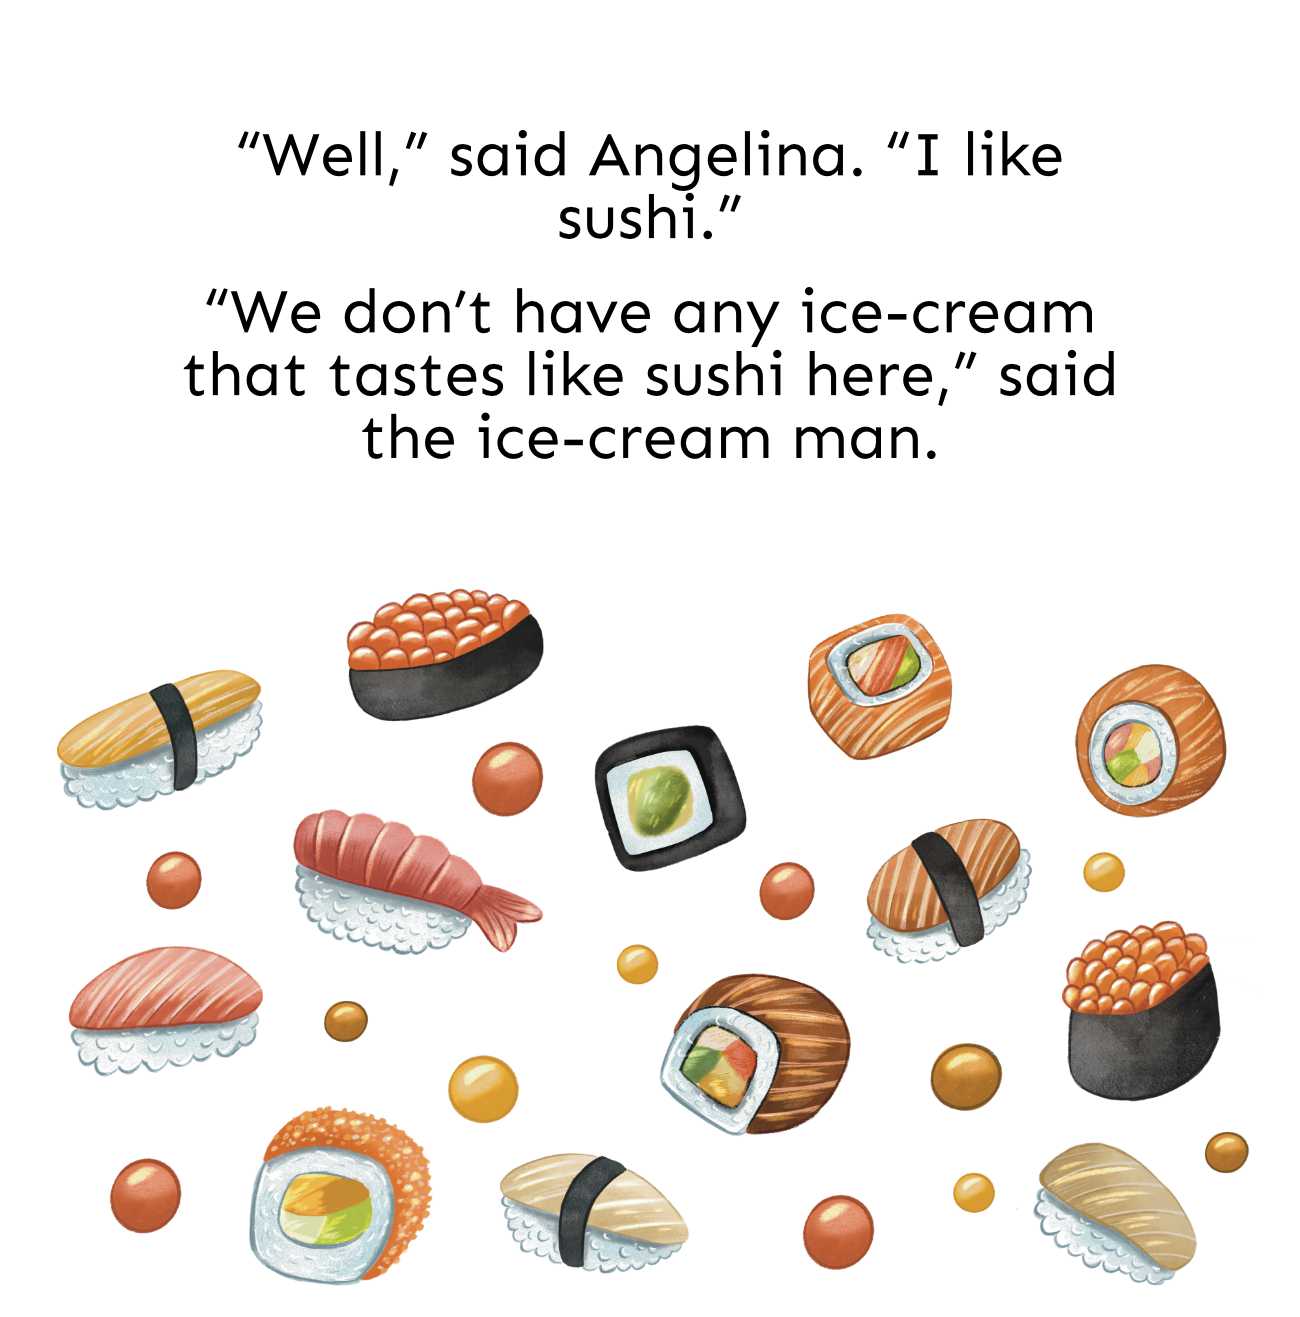 Bedtime Stories The Worlds Best Ice Cream by Jade Maitre short stories for kids page 7